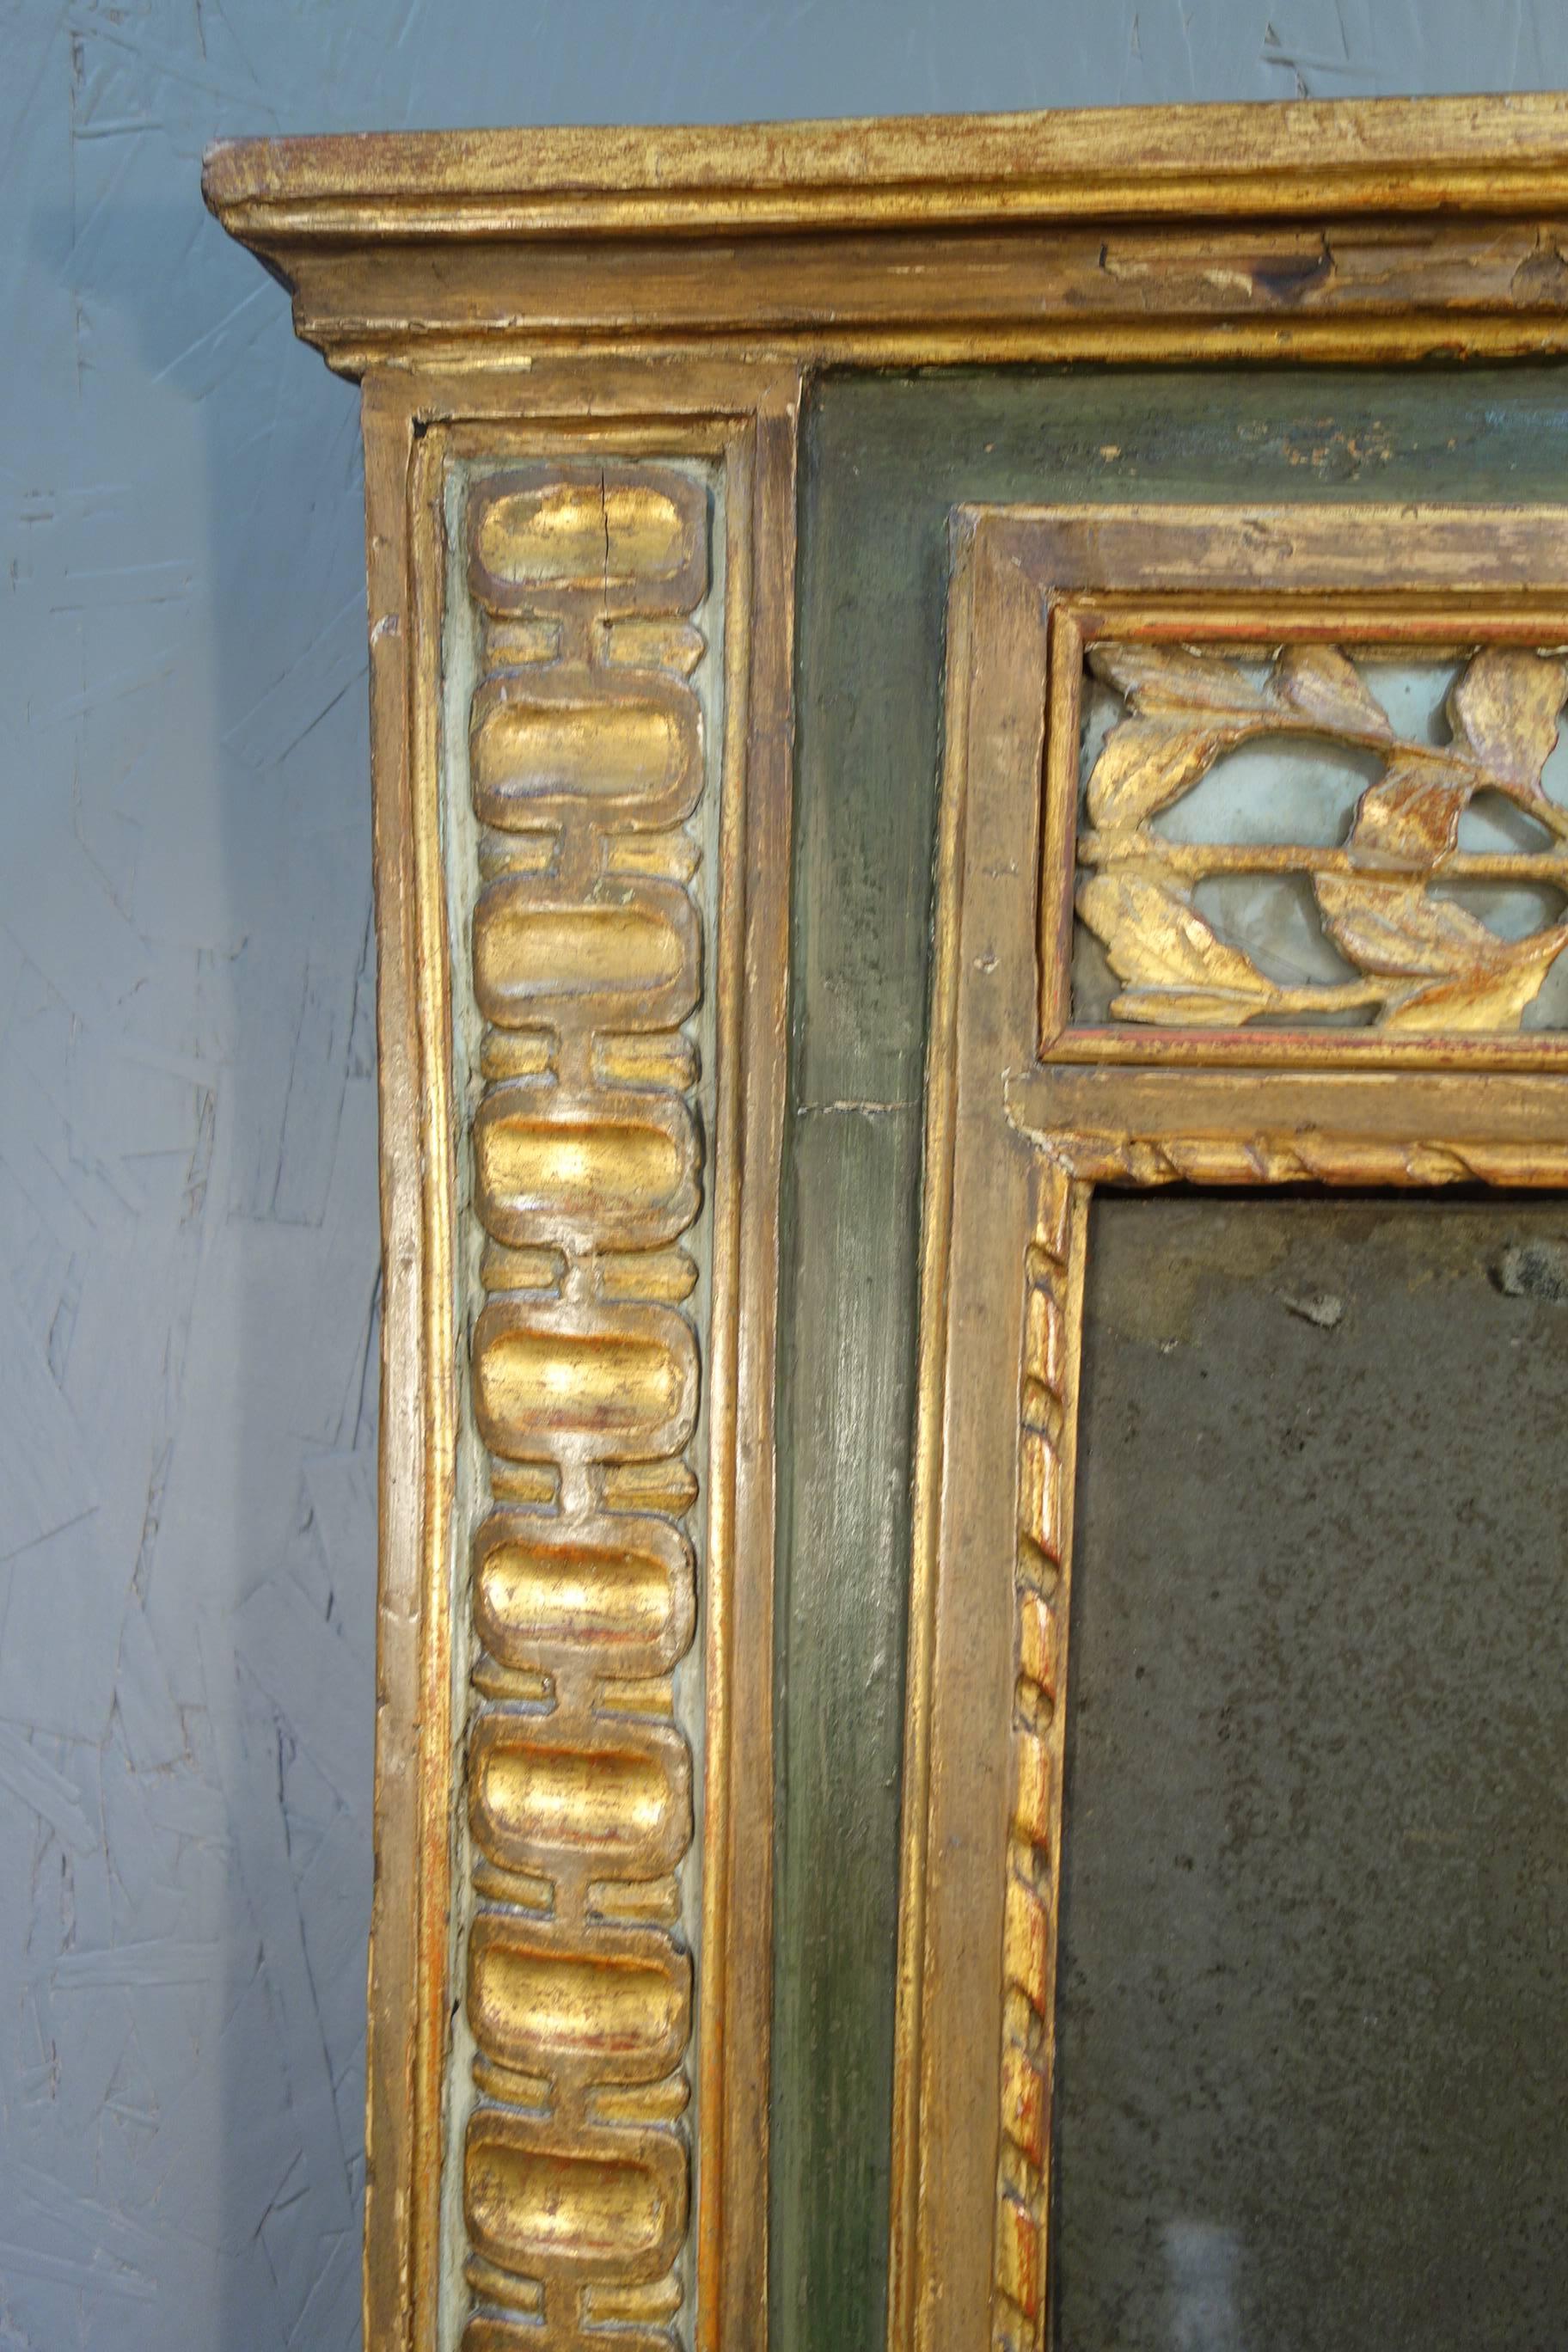 Early 19th century original silver mirror glass in gold gilded frame with green painted borders; hand-carved decorative wood insert in upper margin.

Measures: 41"H x 27.25"W x 2.5"D.